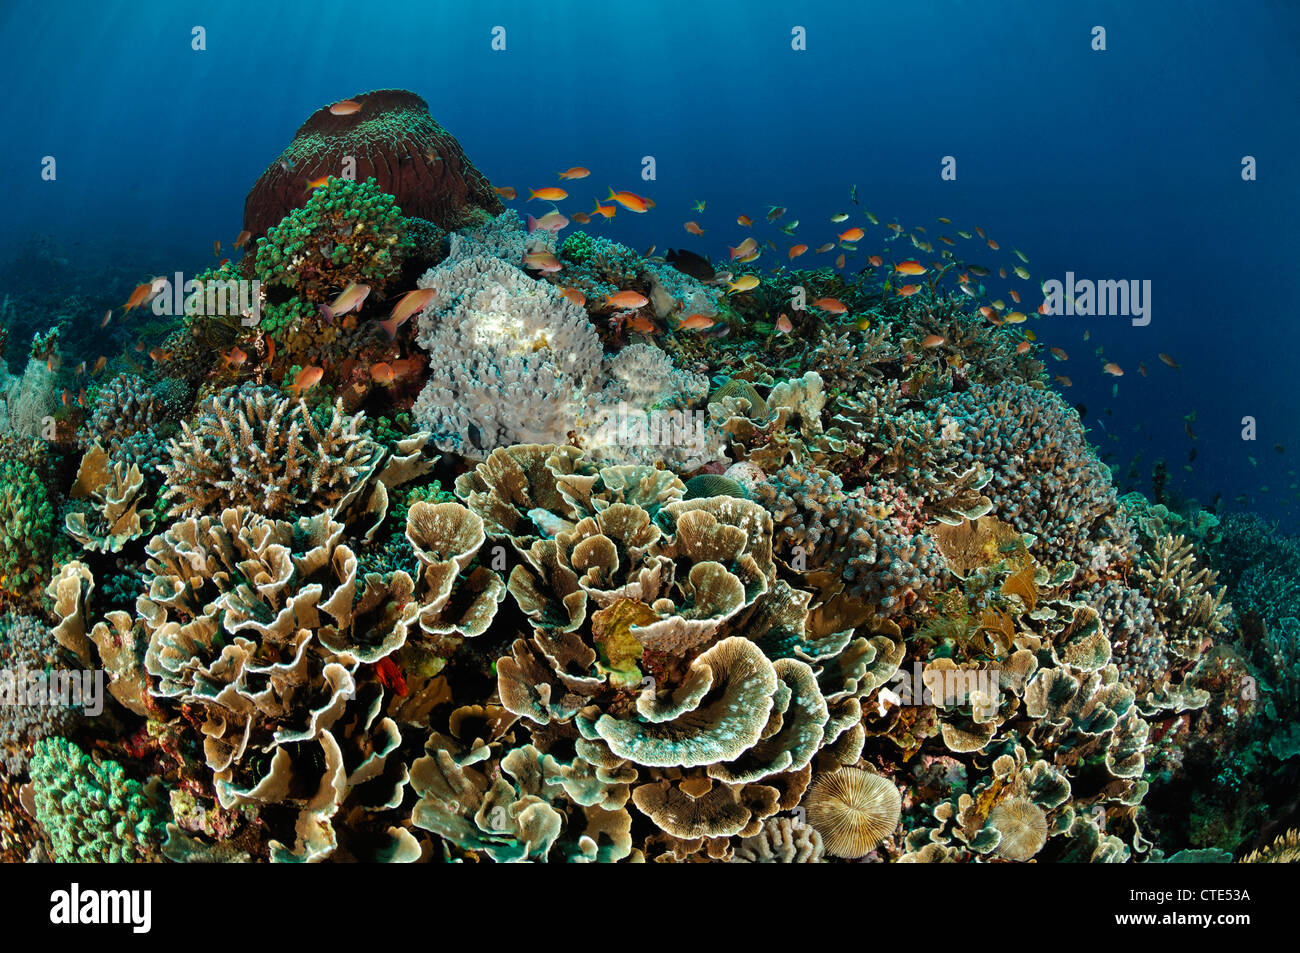 Coral Reef, Alor, Indonesia Foto Stock